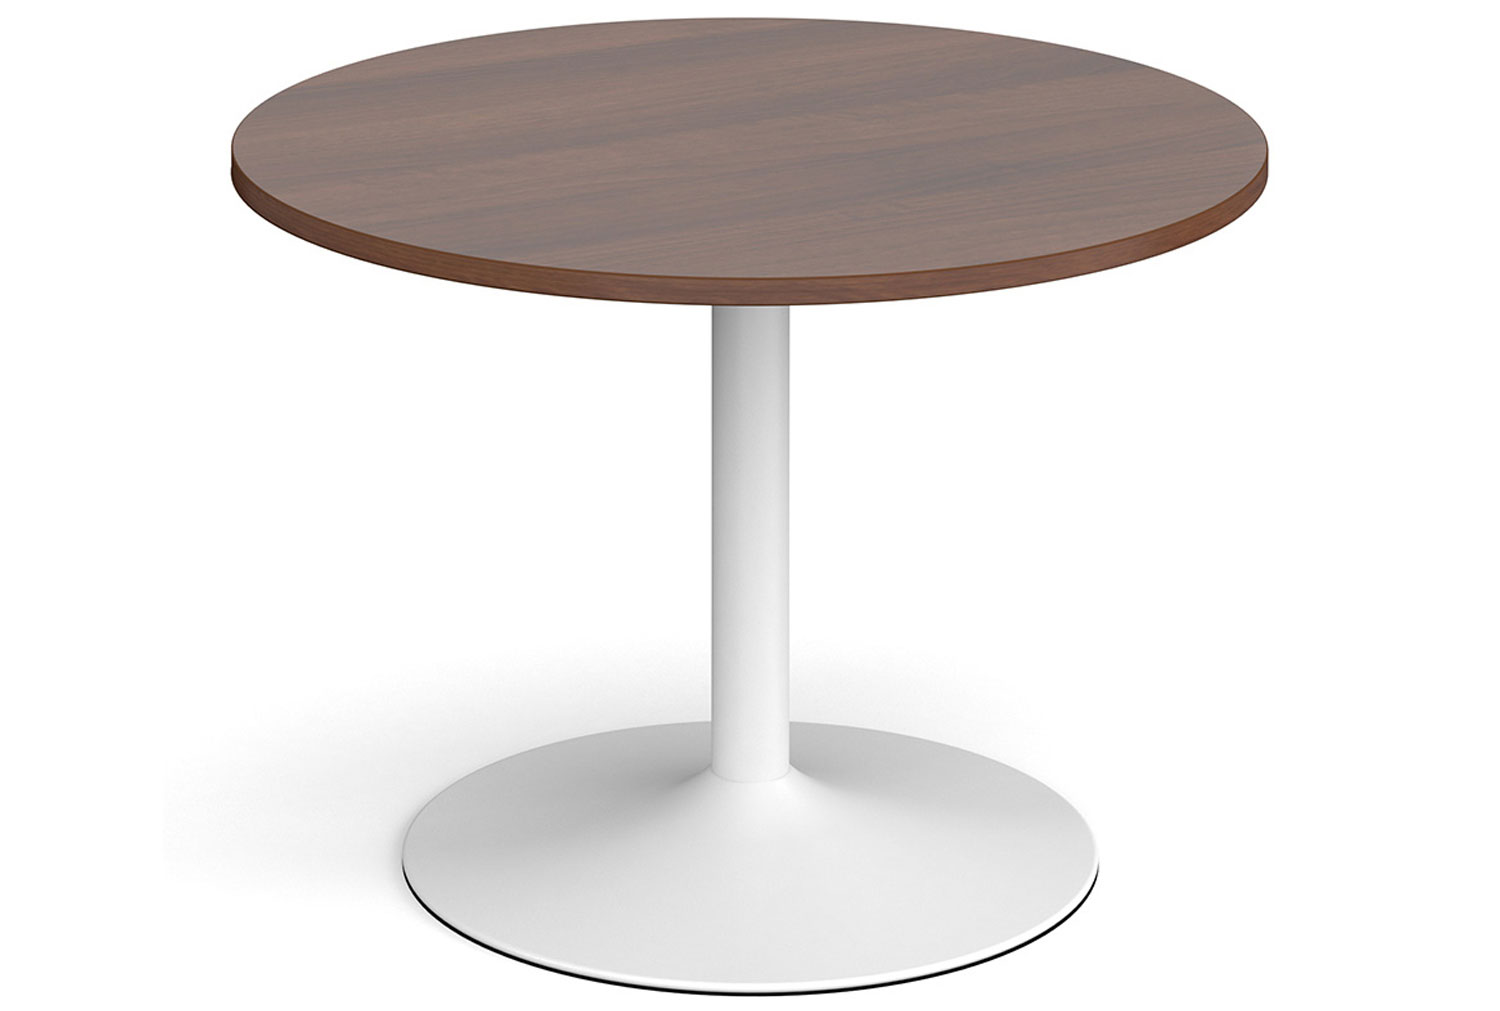 All Walnut Trumpet Base Round Boardroom Table, 100diax73h (cm)